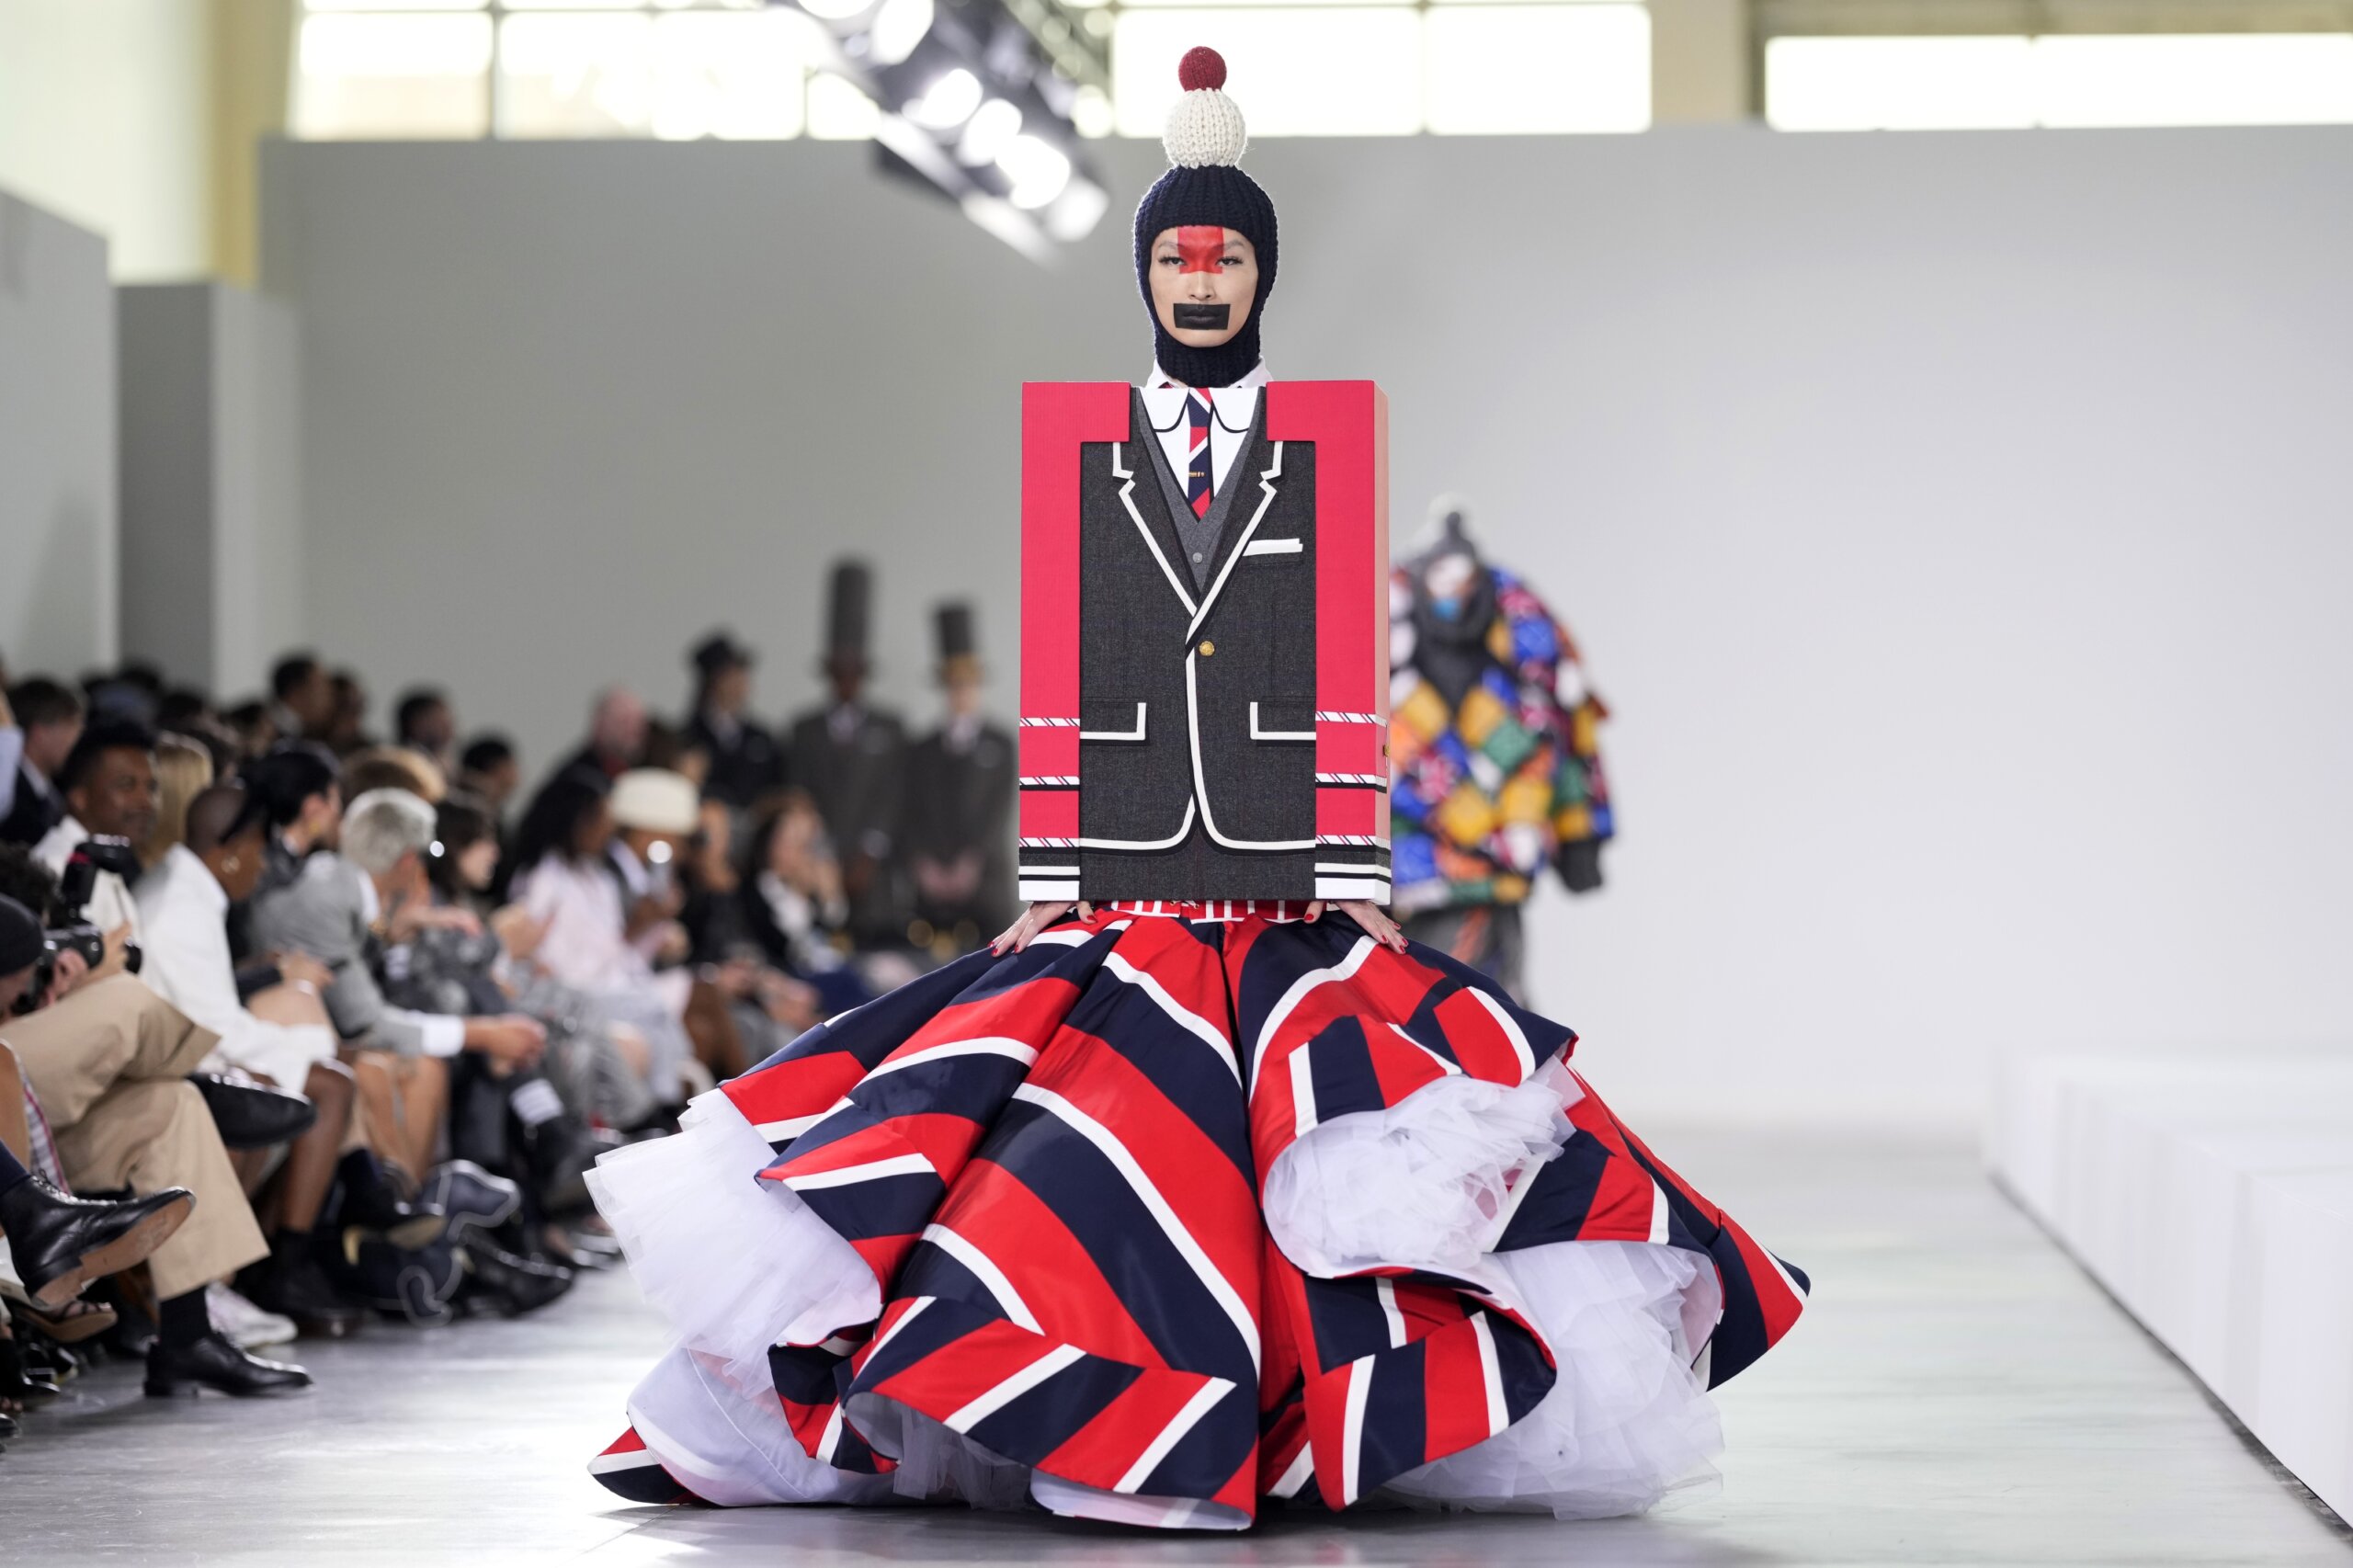 Thom Browne holds a ‘Teddy Talk’ in playful toythemed show WTOP News